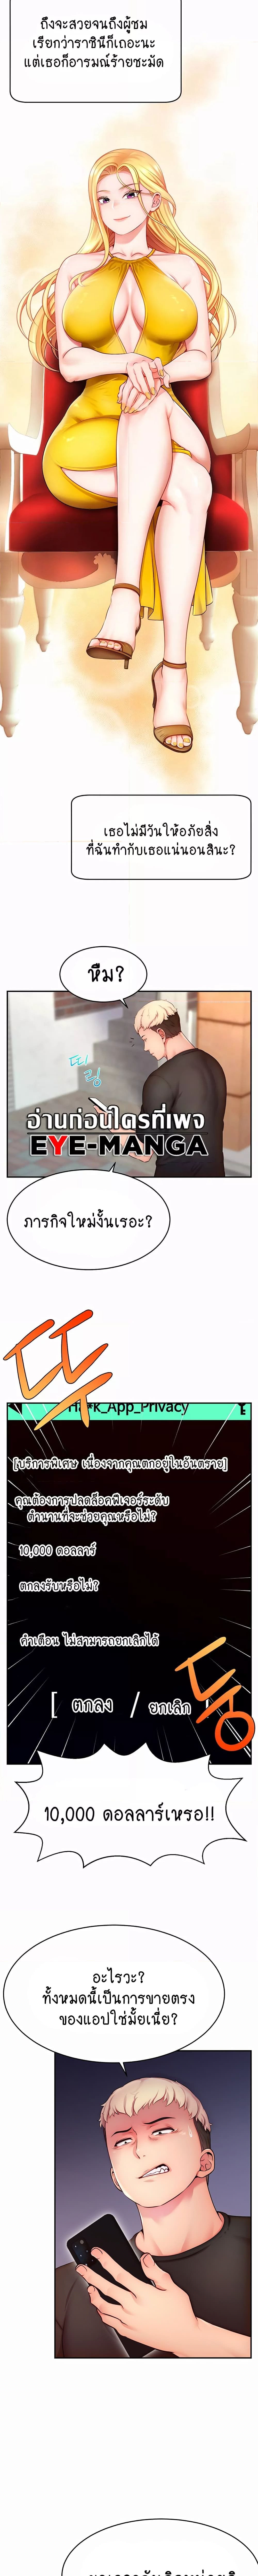 Making Friends With Streamers by Hacking! ตอนที่ 3 ภาพ 16